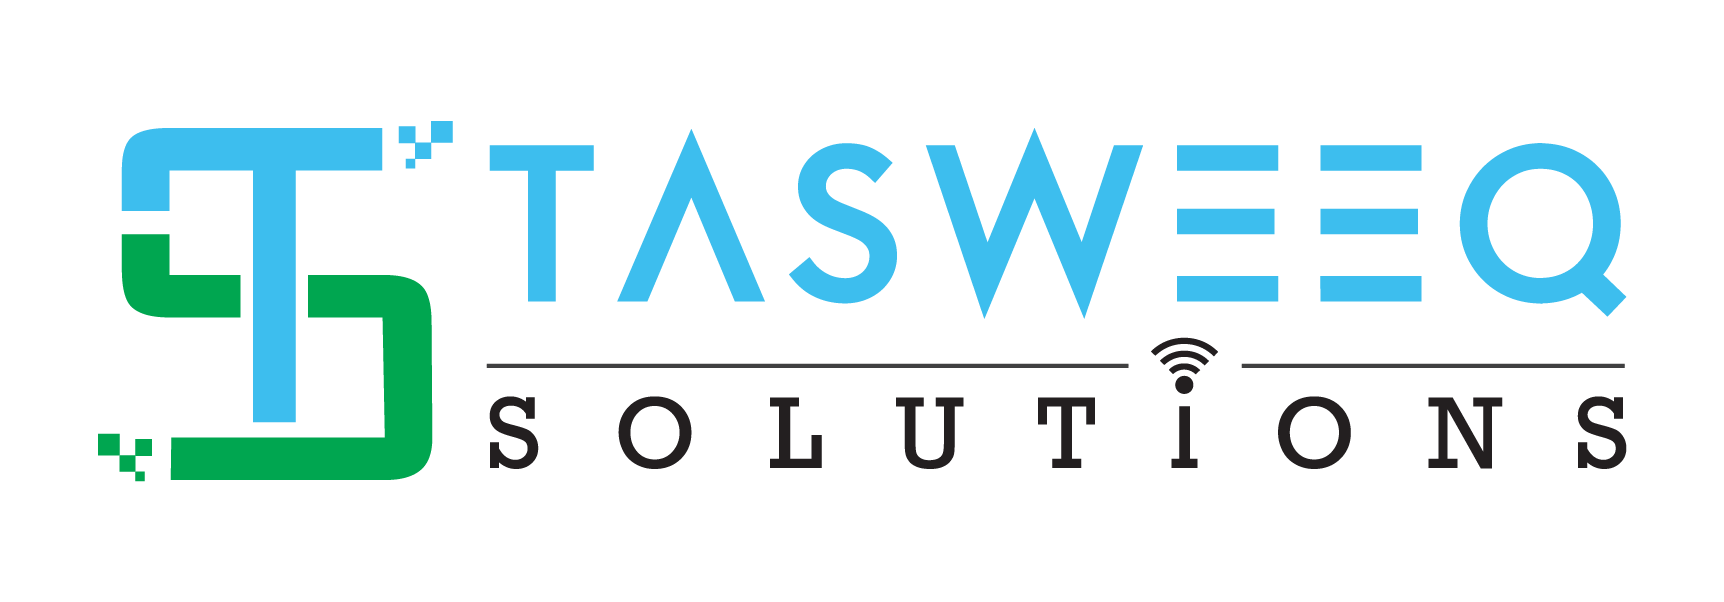 Tasweeq Solutions